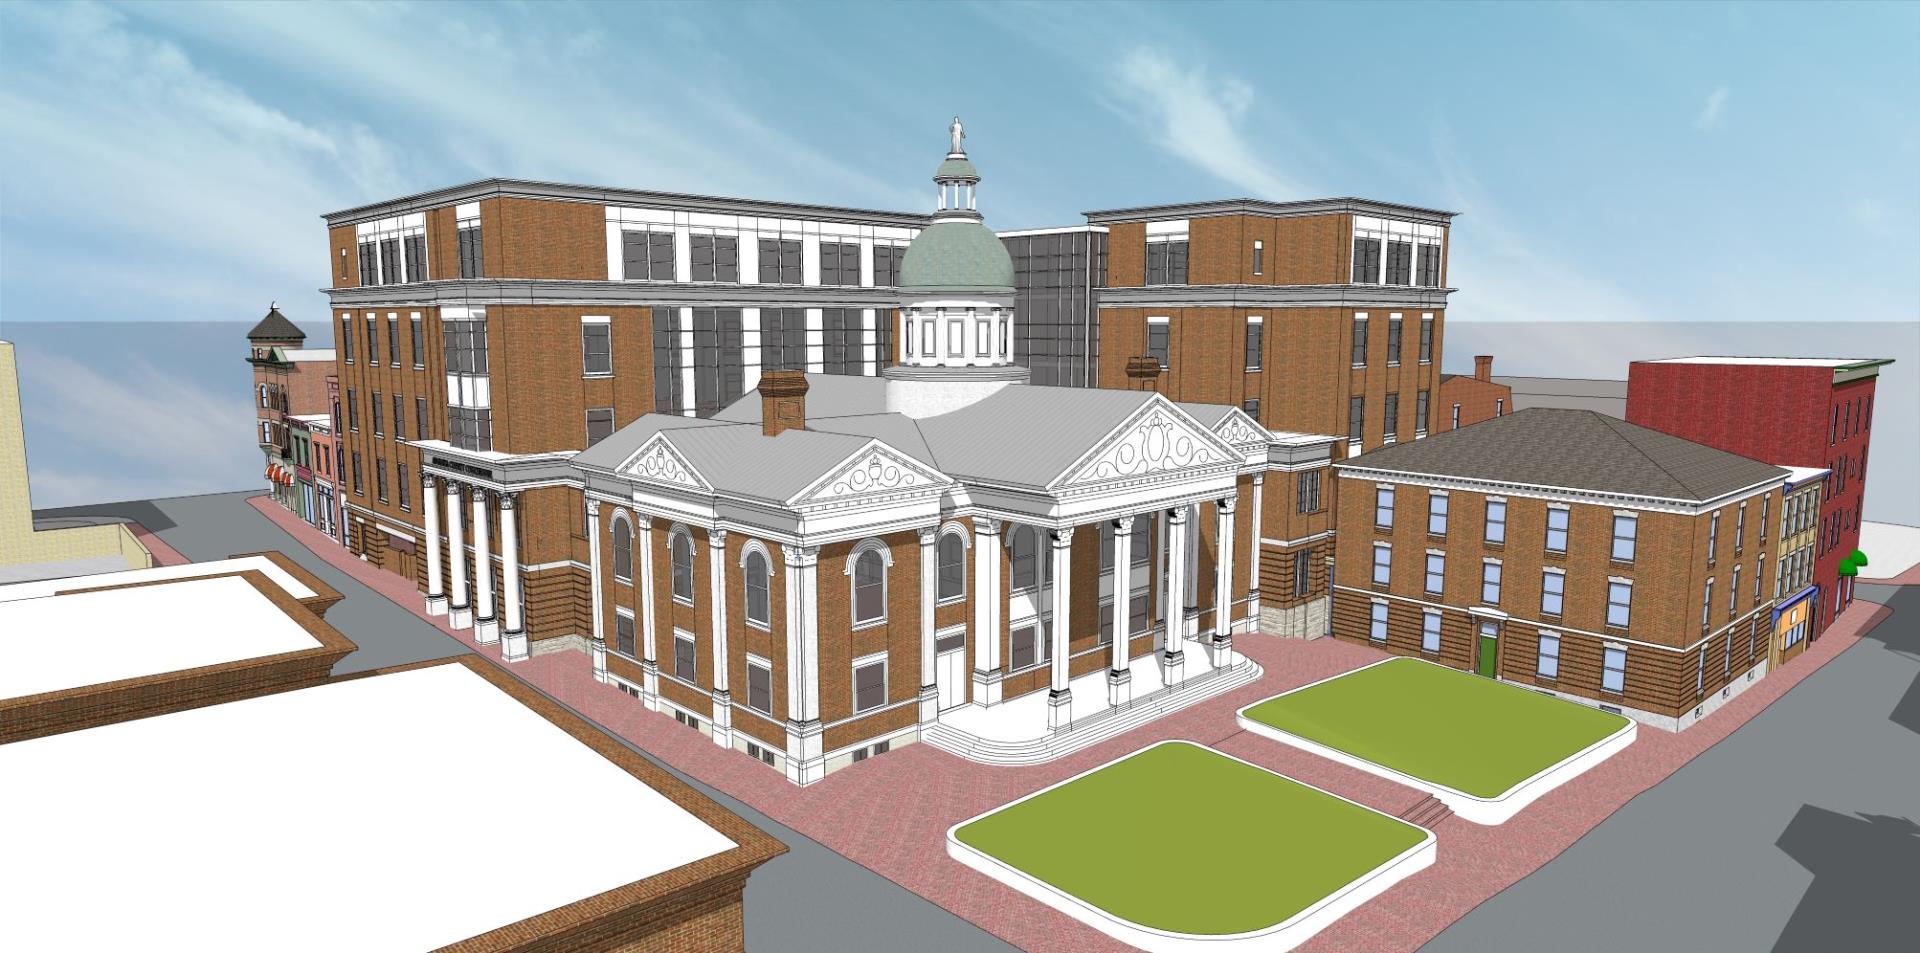 Courthouse project rendering